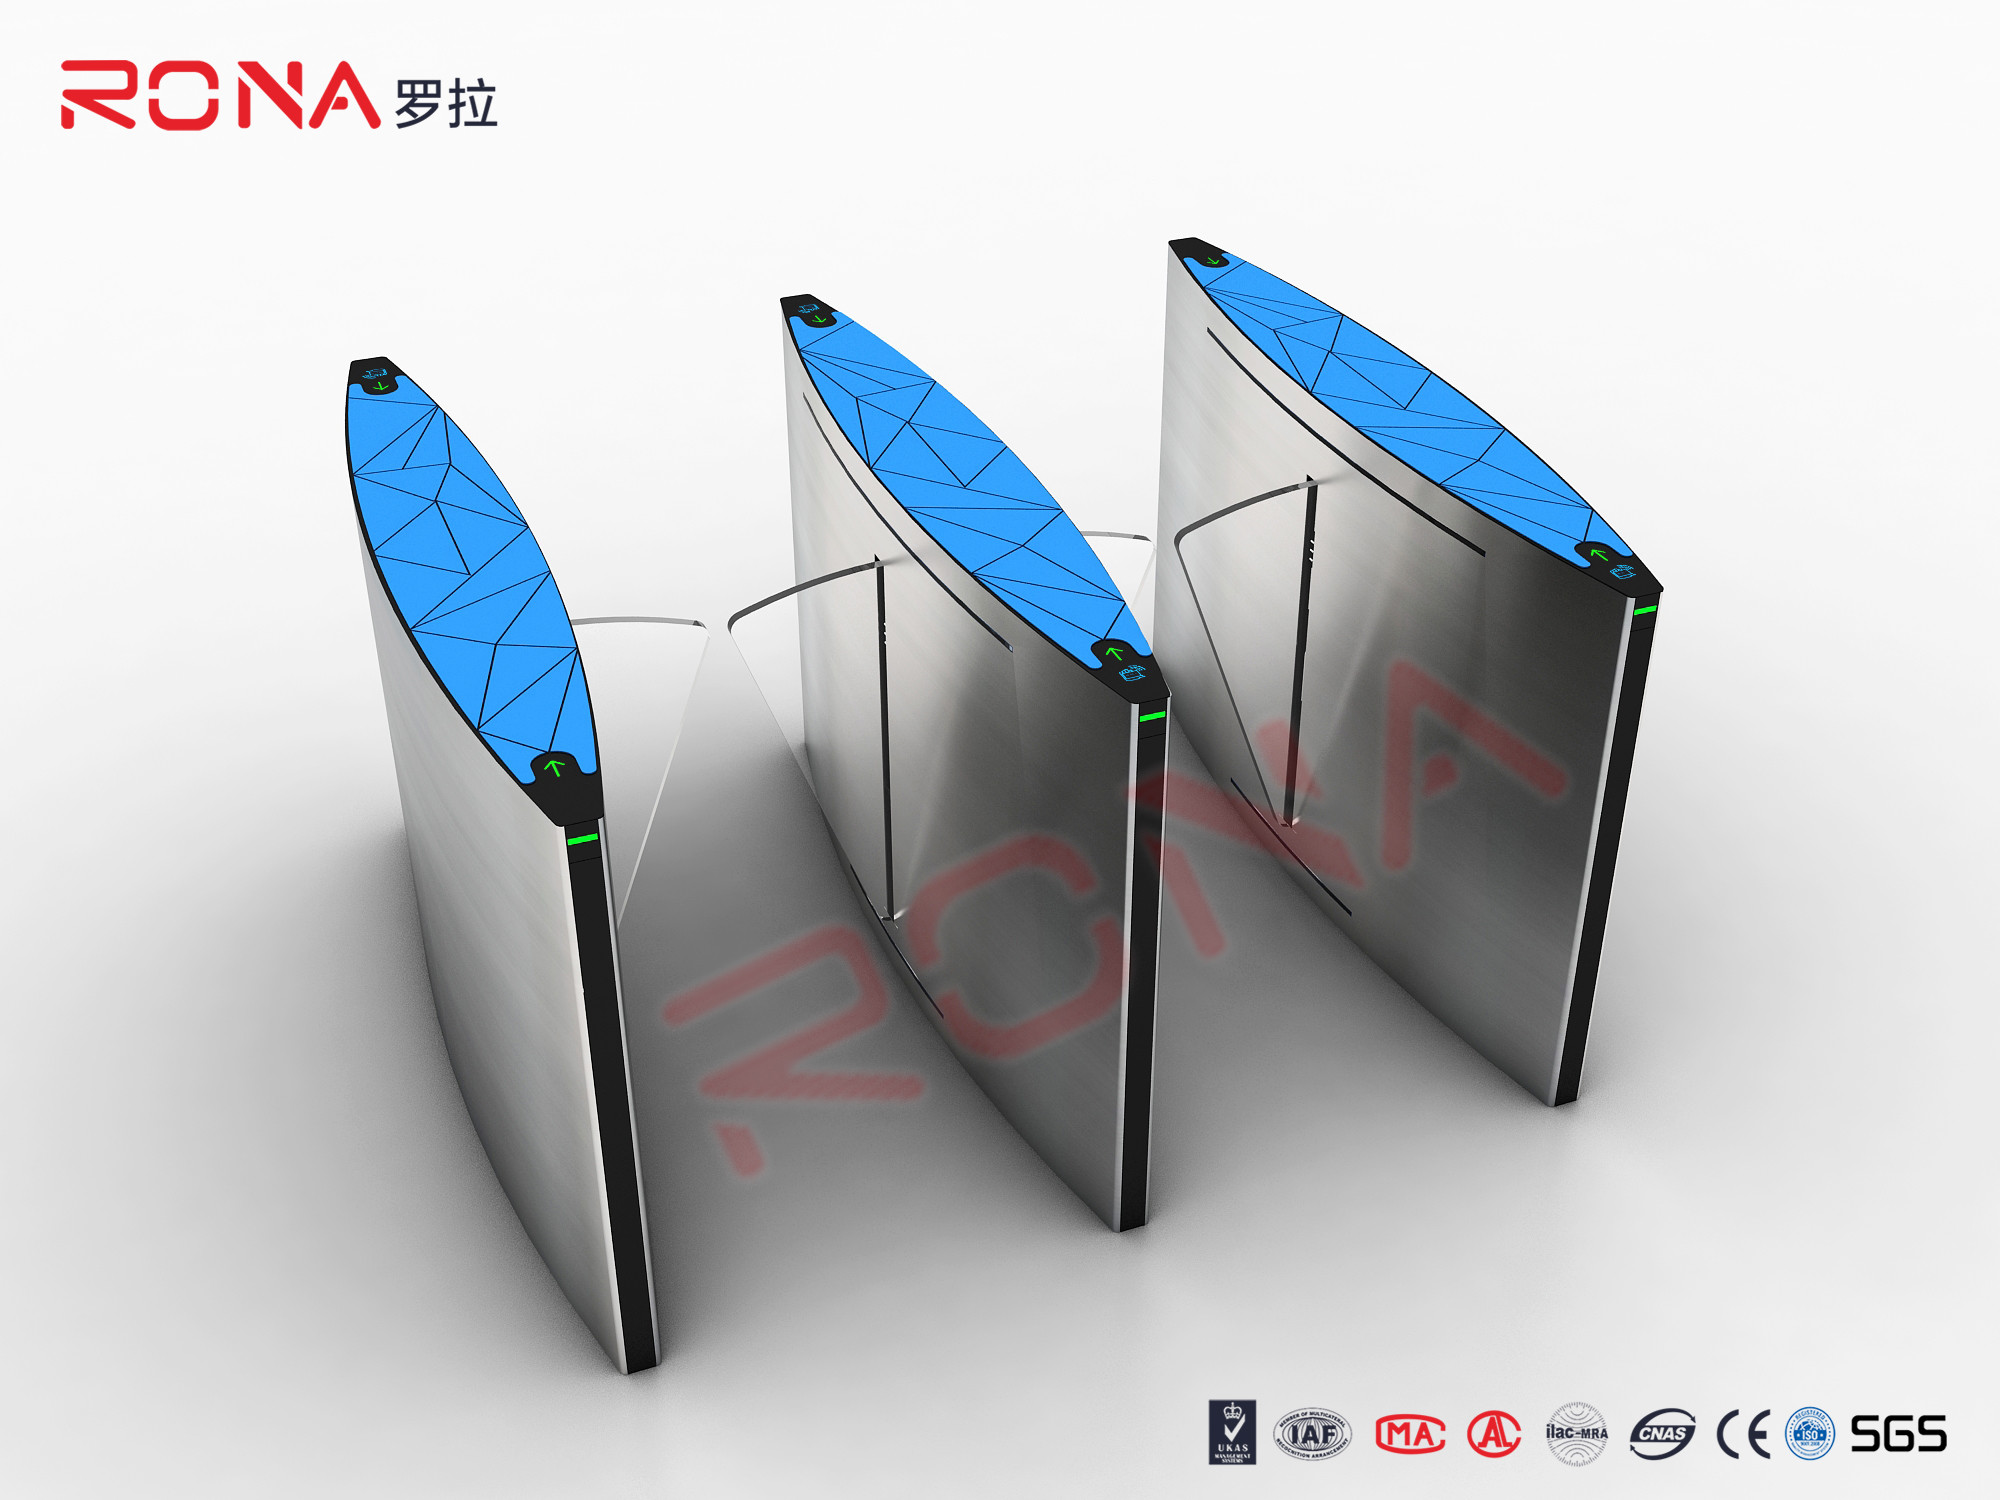  Access Control Automatic Flap Turnstile Walk Through Optical Turnstile For Subway Station Manufactures